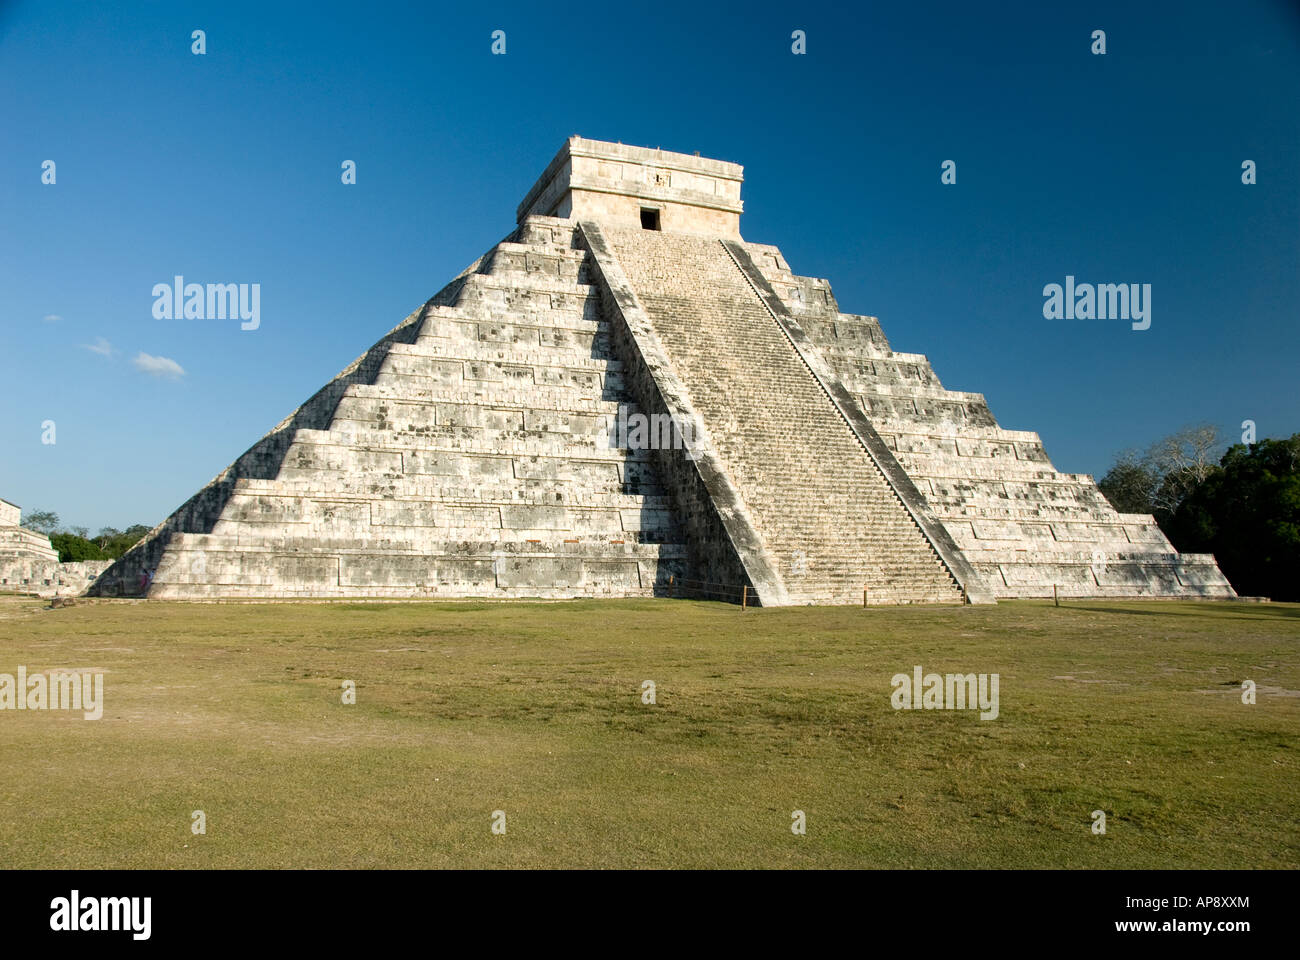 Chichen Itza is a large pre-Columbian archaeological site built by the Maya civilization located in the Yucatán, Mexico Stock Photo